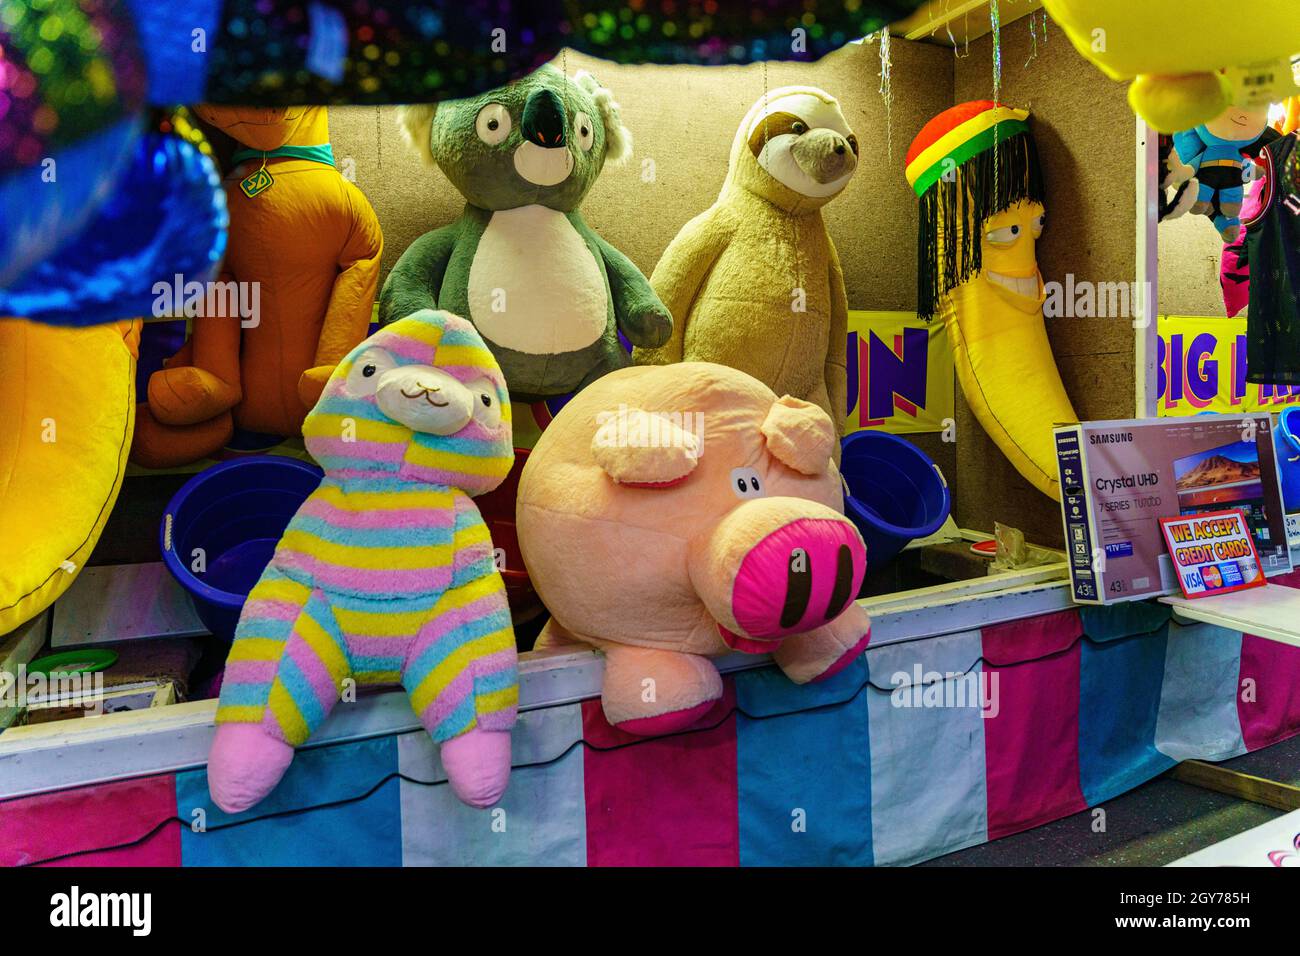 New Holland, PA, USA - September 30, 2021: Large stuffed toys are some of the prizes for game winners  at the annual community street fair in the smal Stock Photo